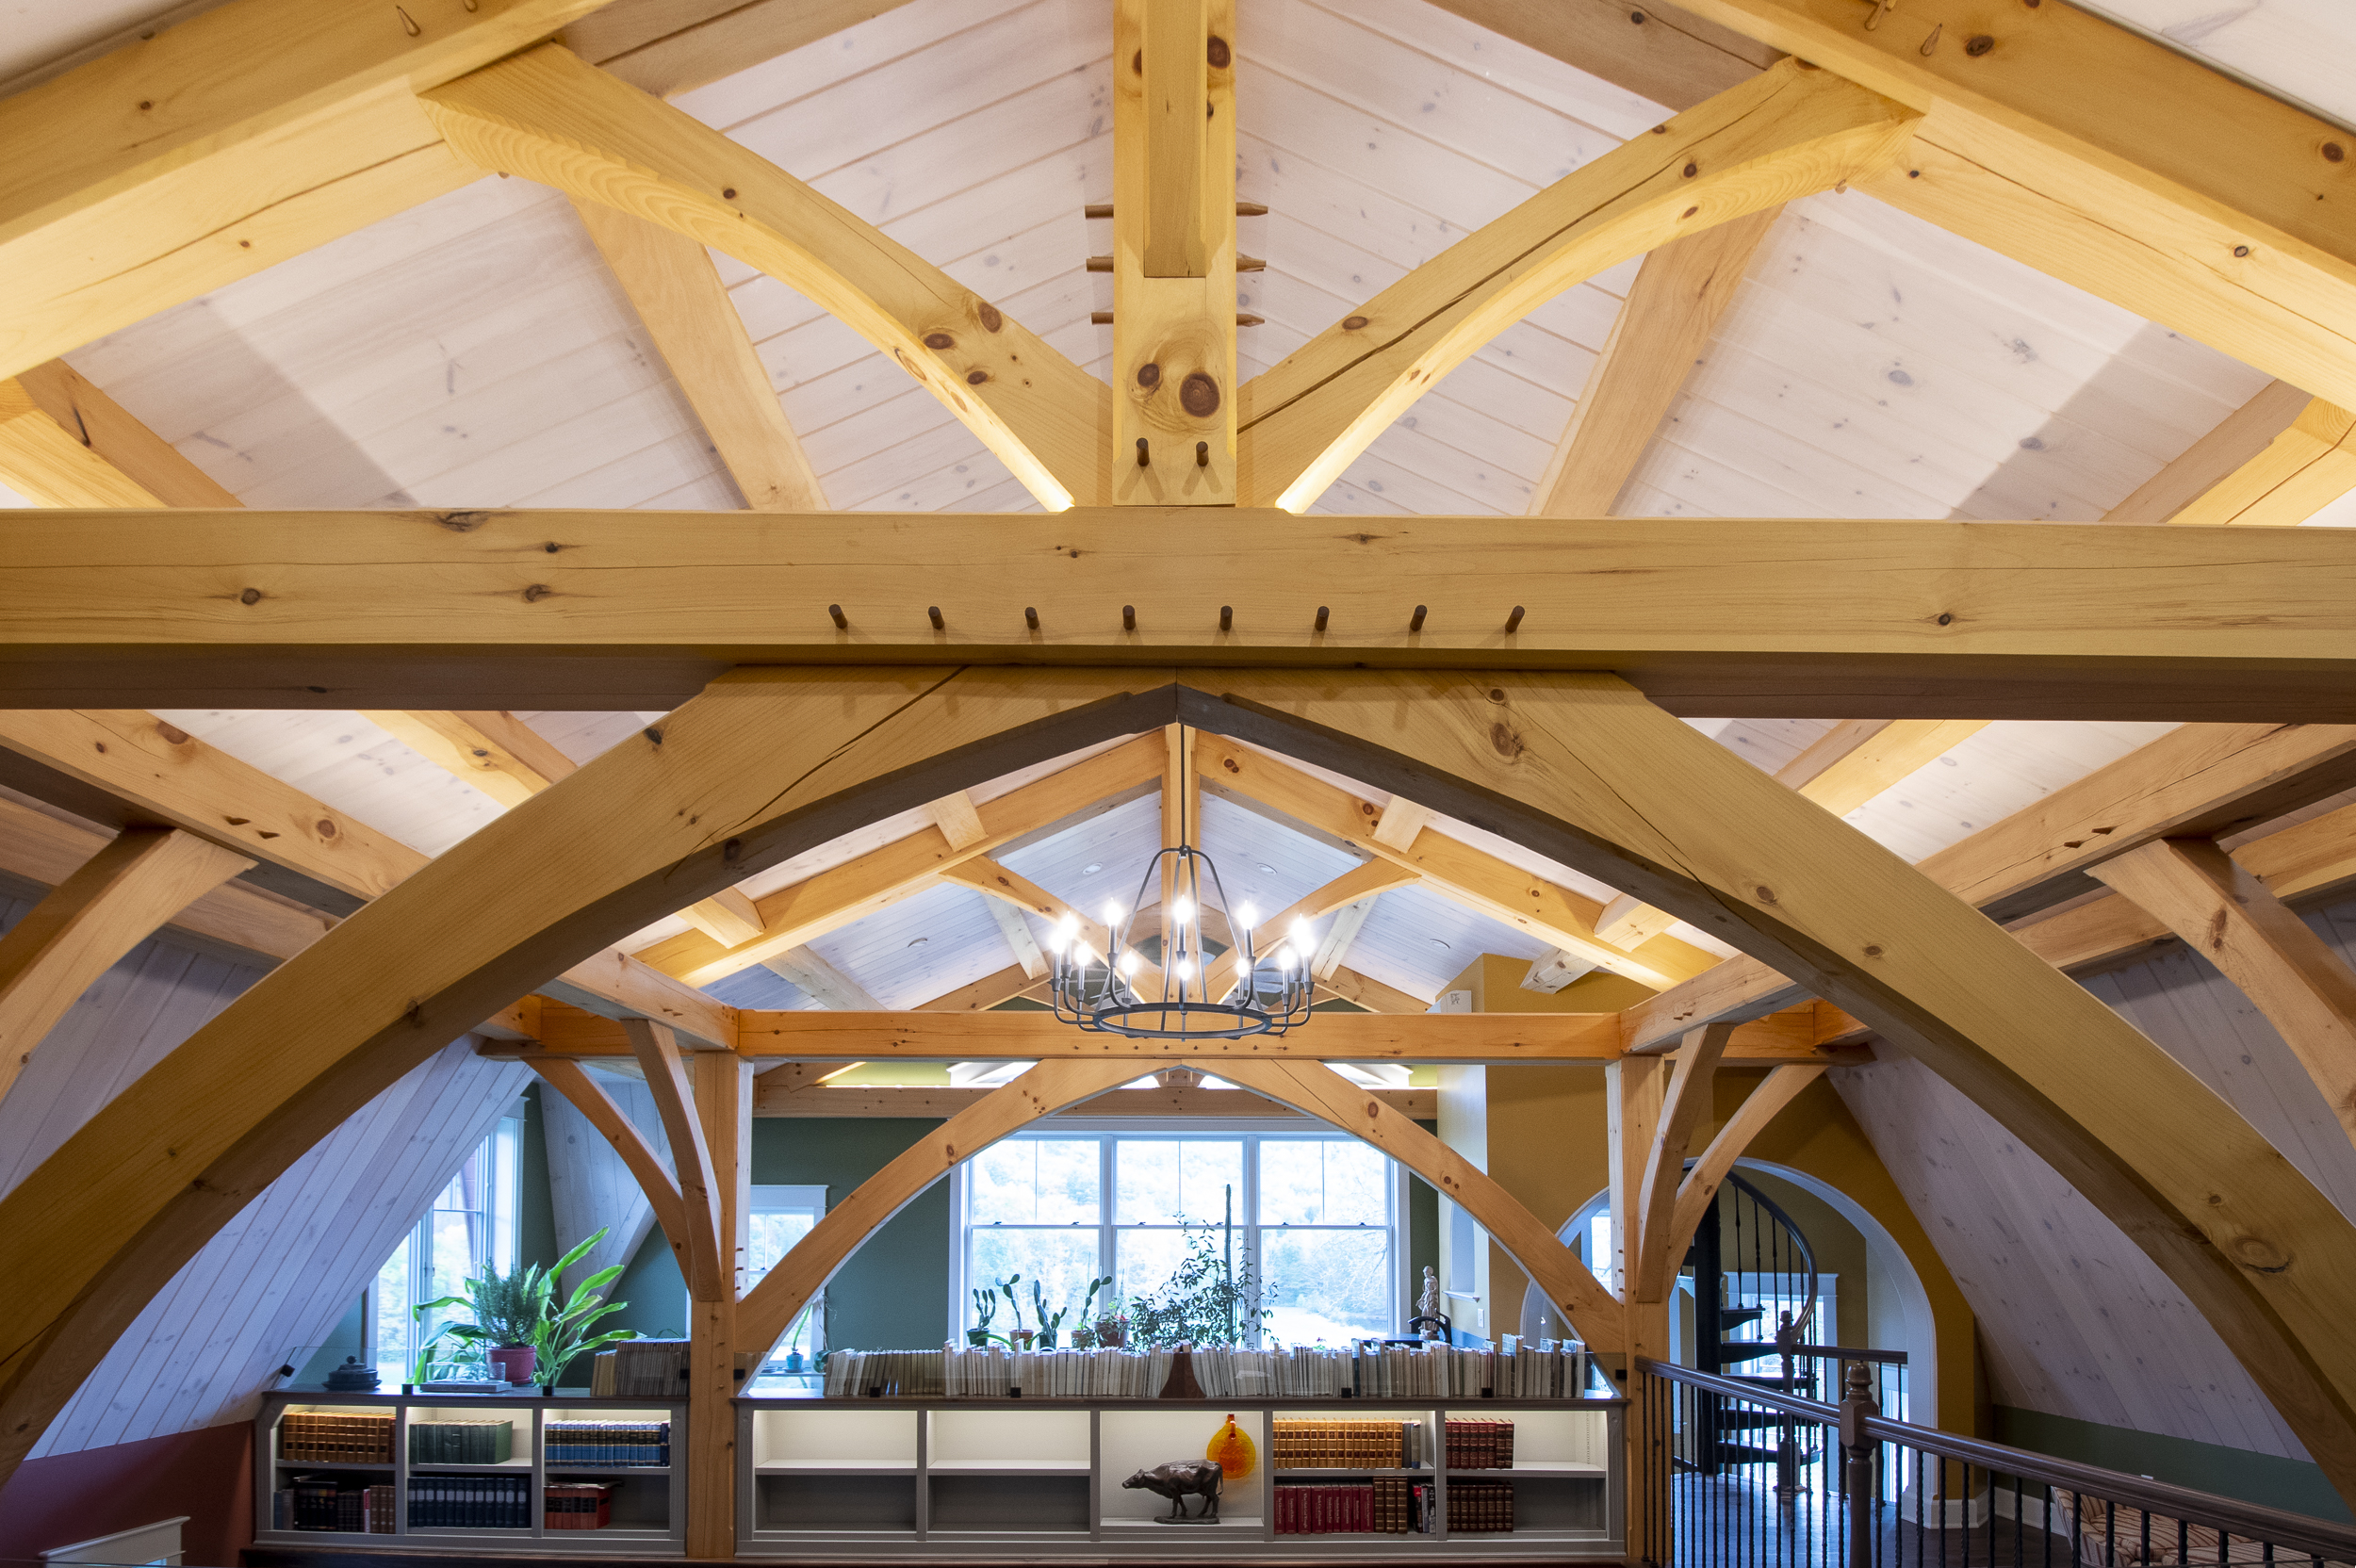 timber frame arch brace post and beam dream home